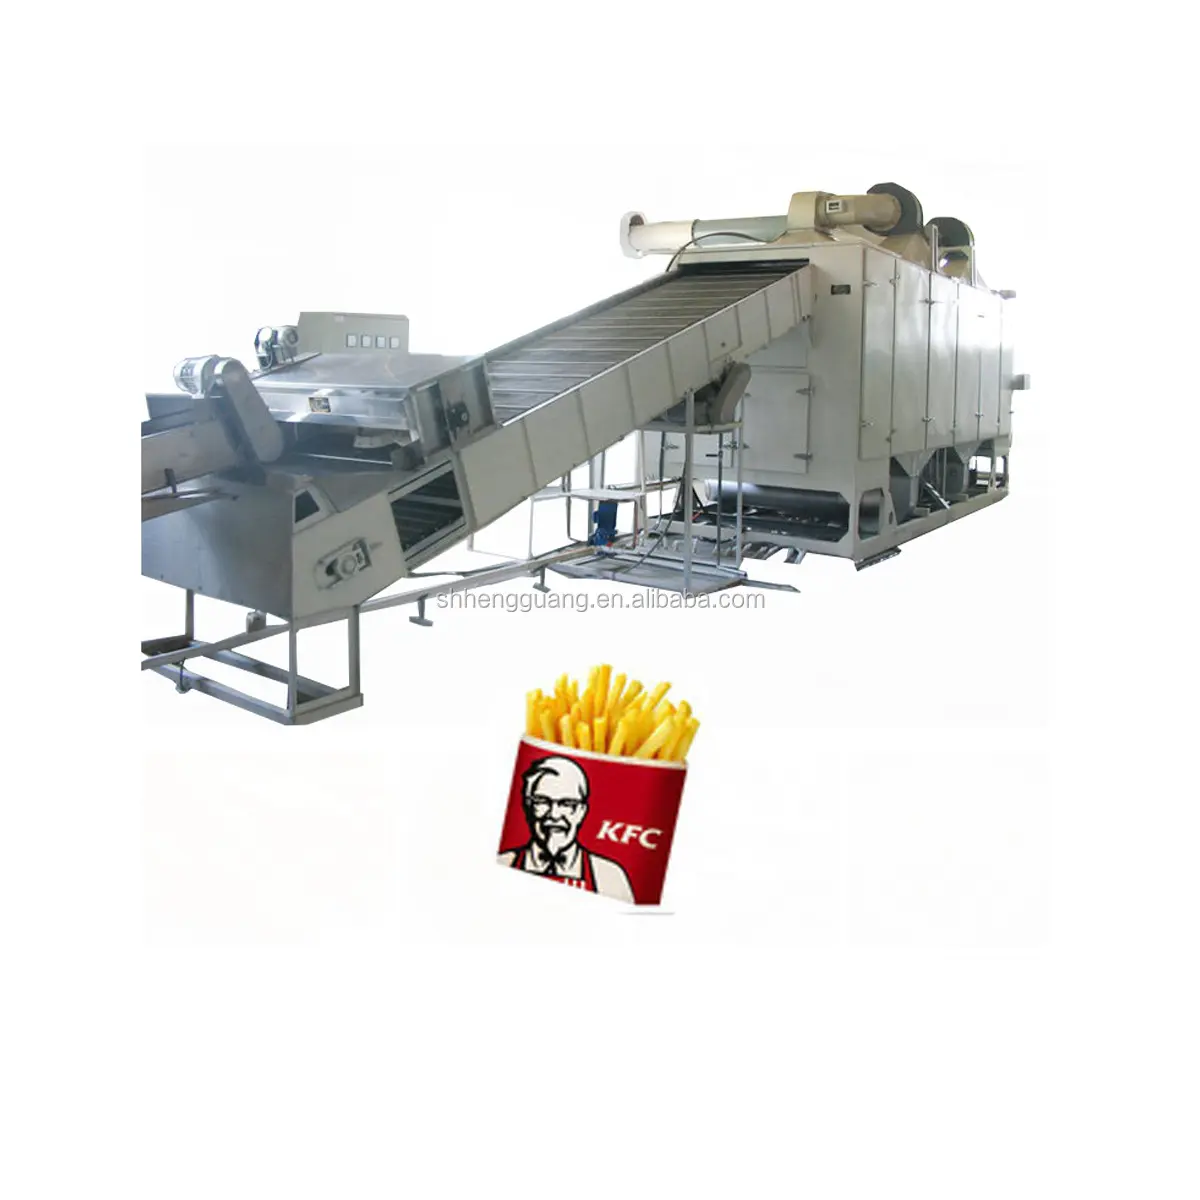 HG industrial factory french fries production line/ fresh potato chips making machine/snack making machine